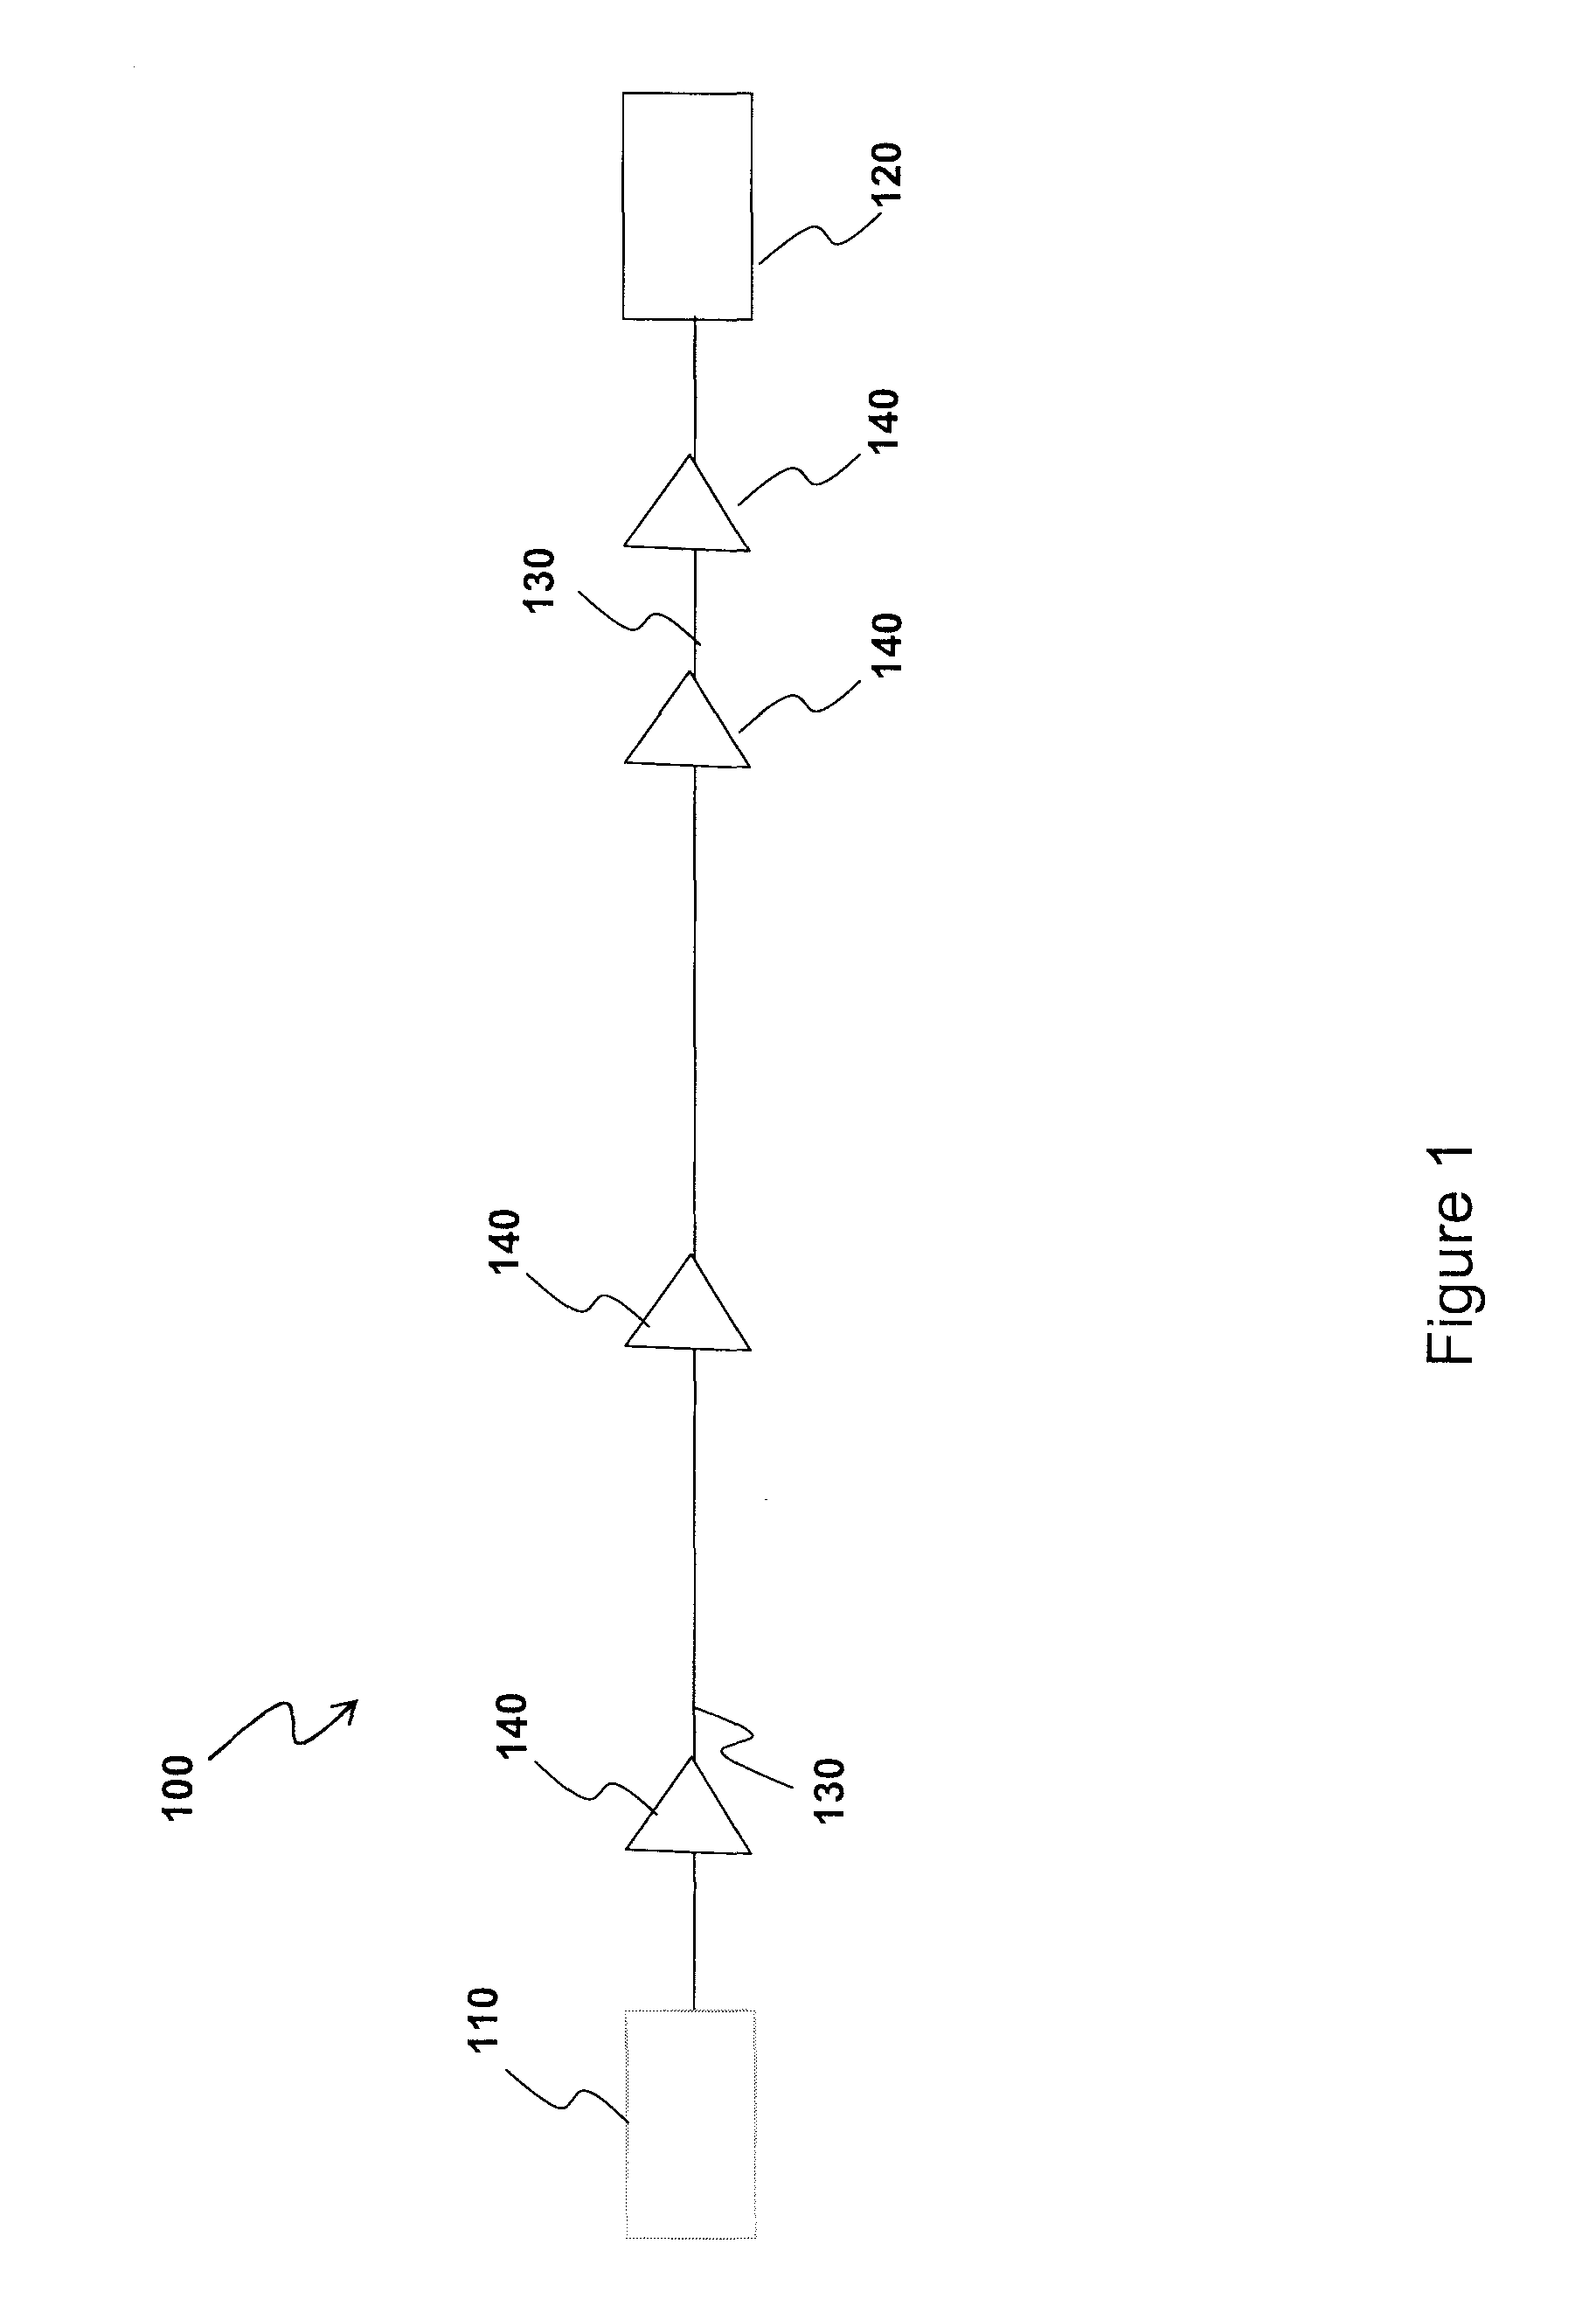 System and Method for Coherent Detection of Optical Signals